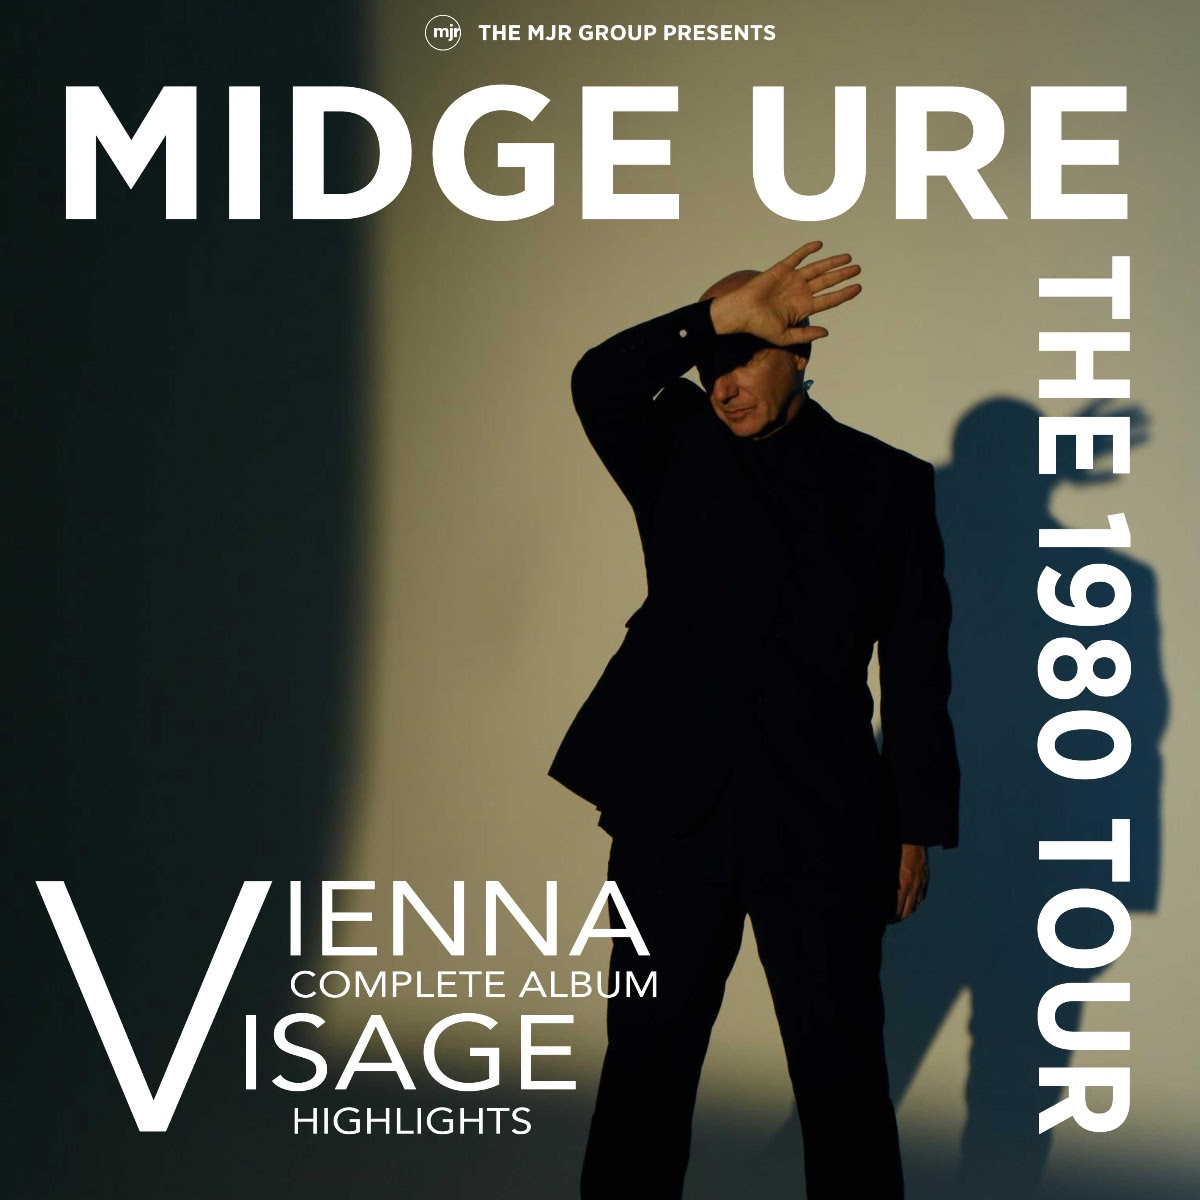 Midge Ure announces 'The 1980' tour is coming to Liverpool